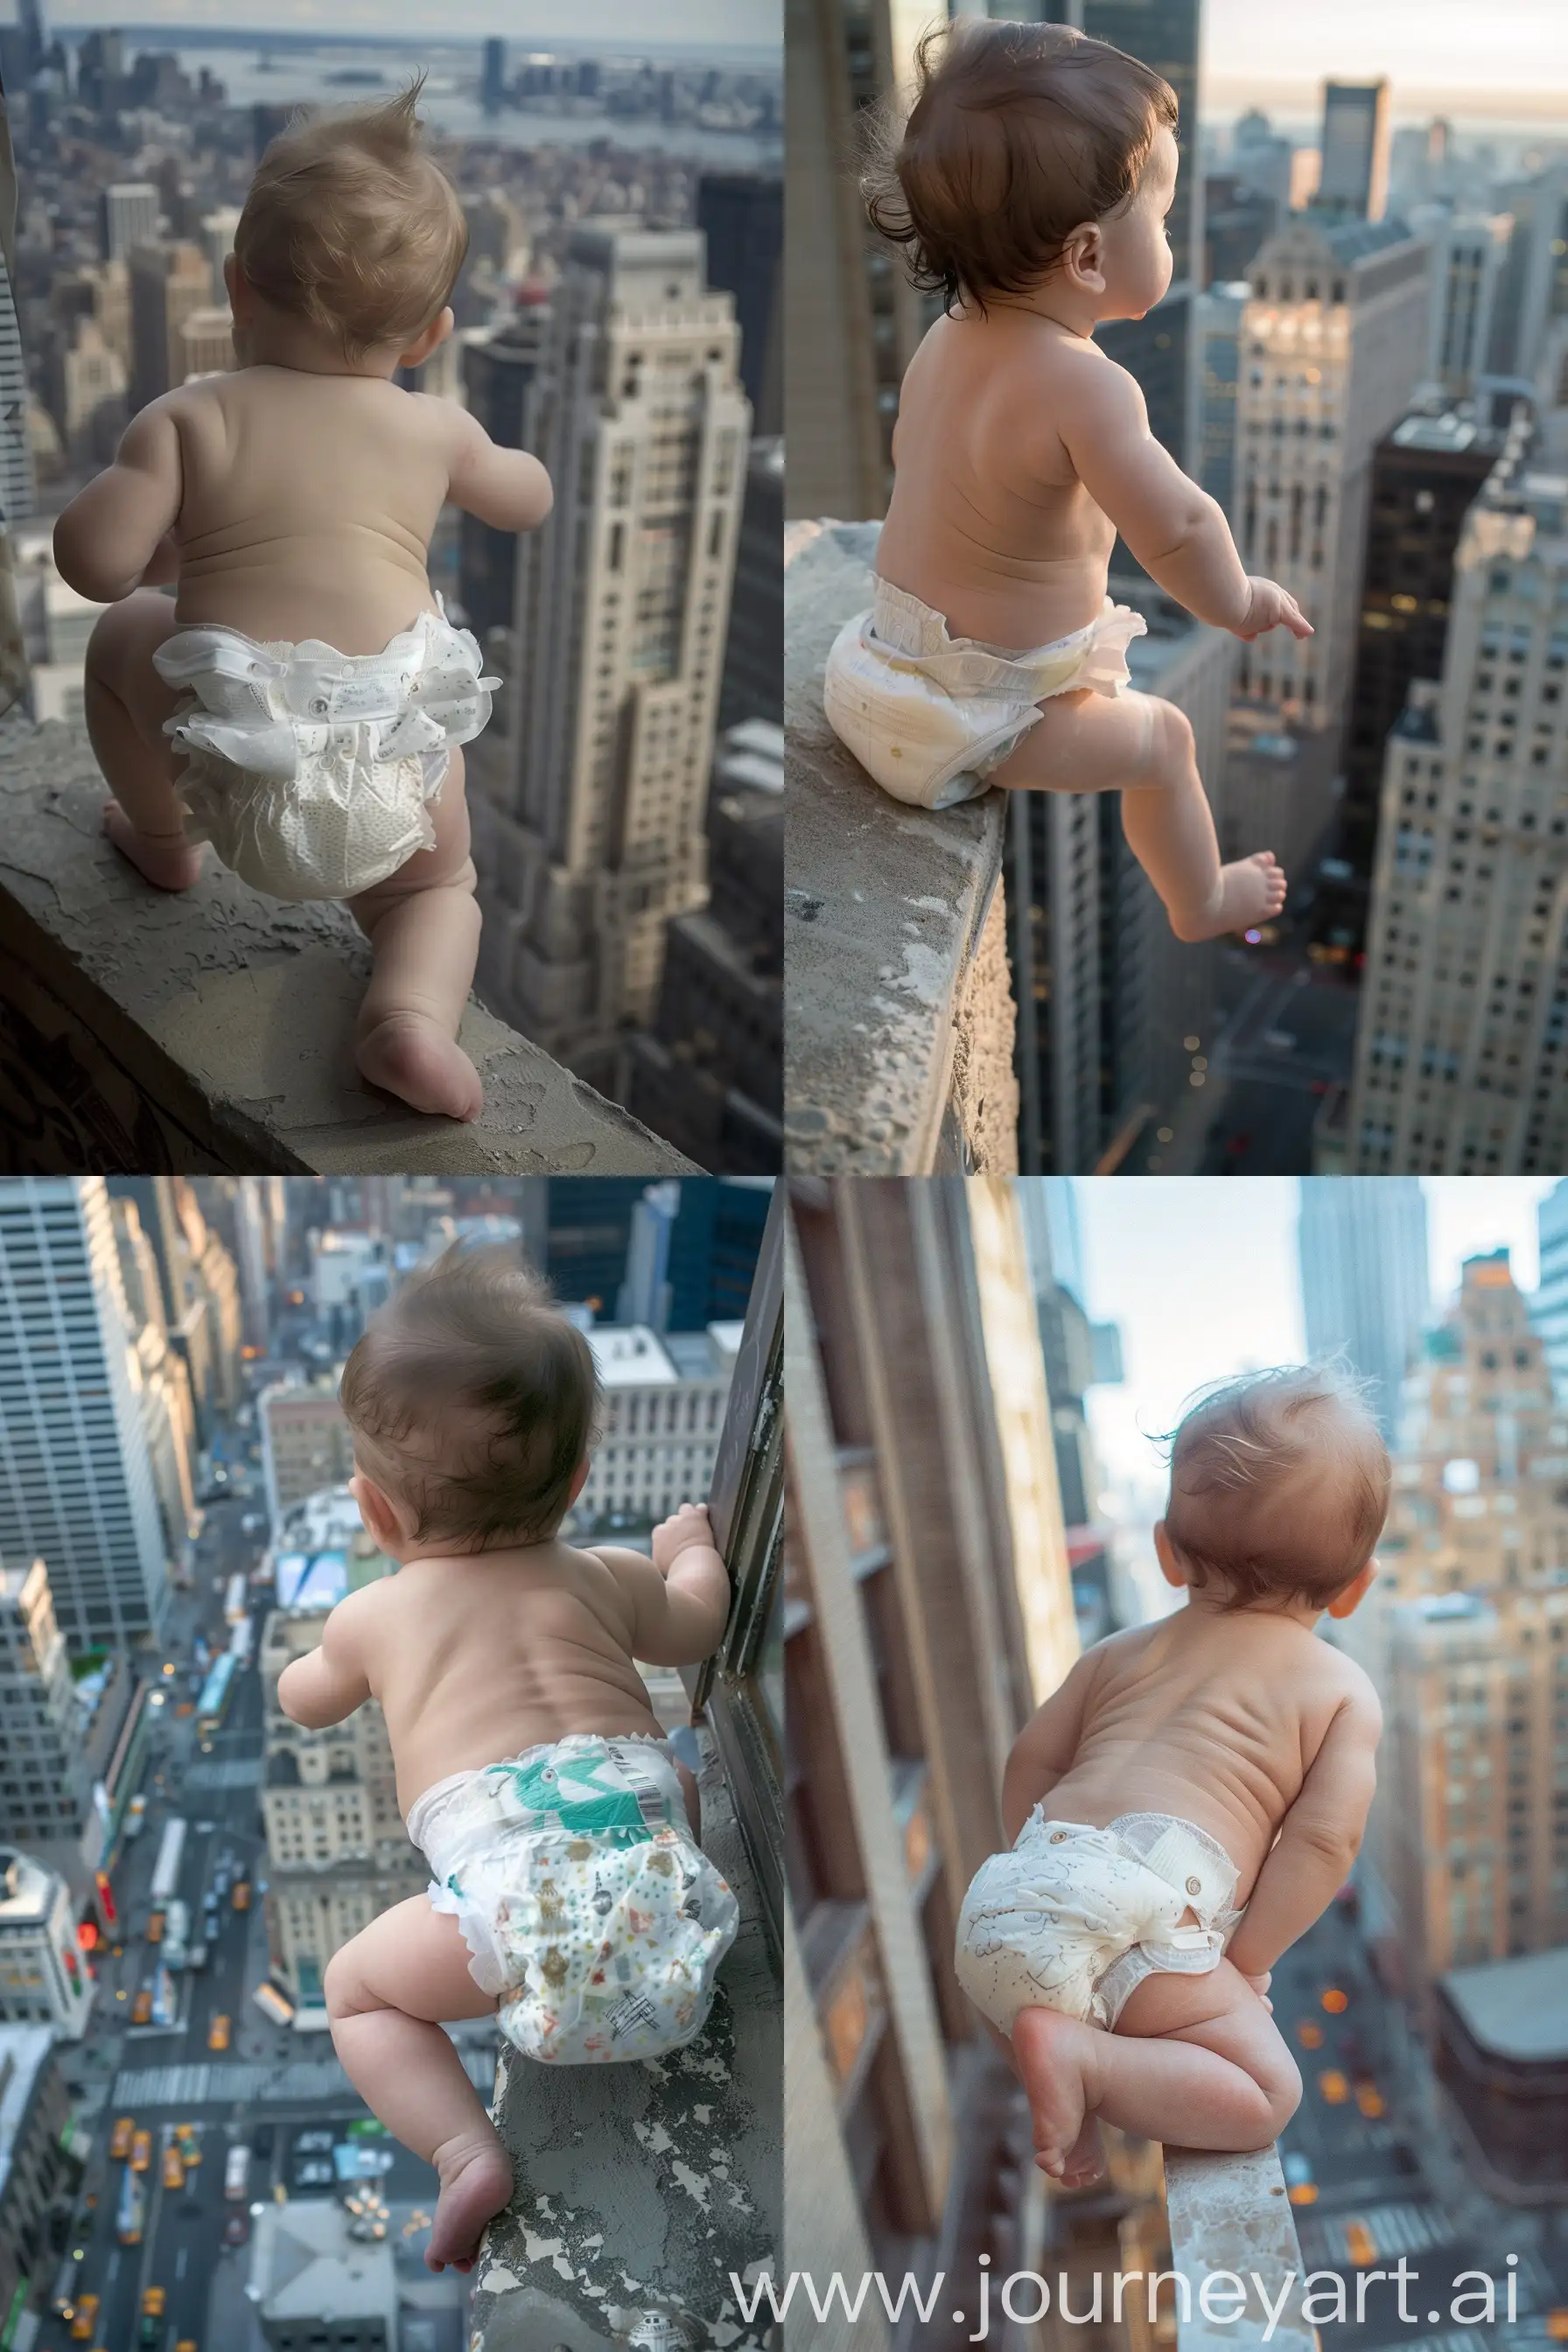 Adorable-Diapered-Baby-in-Heroic-City-Gaze